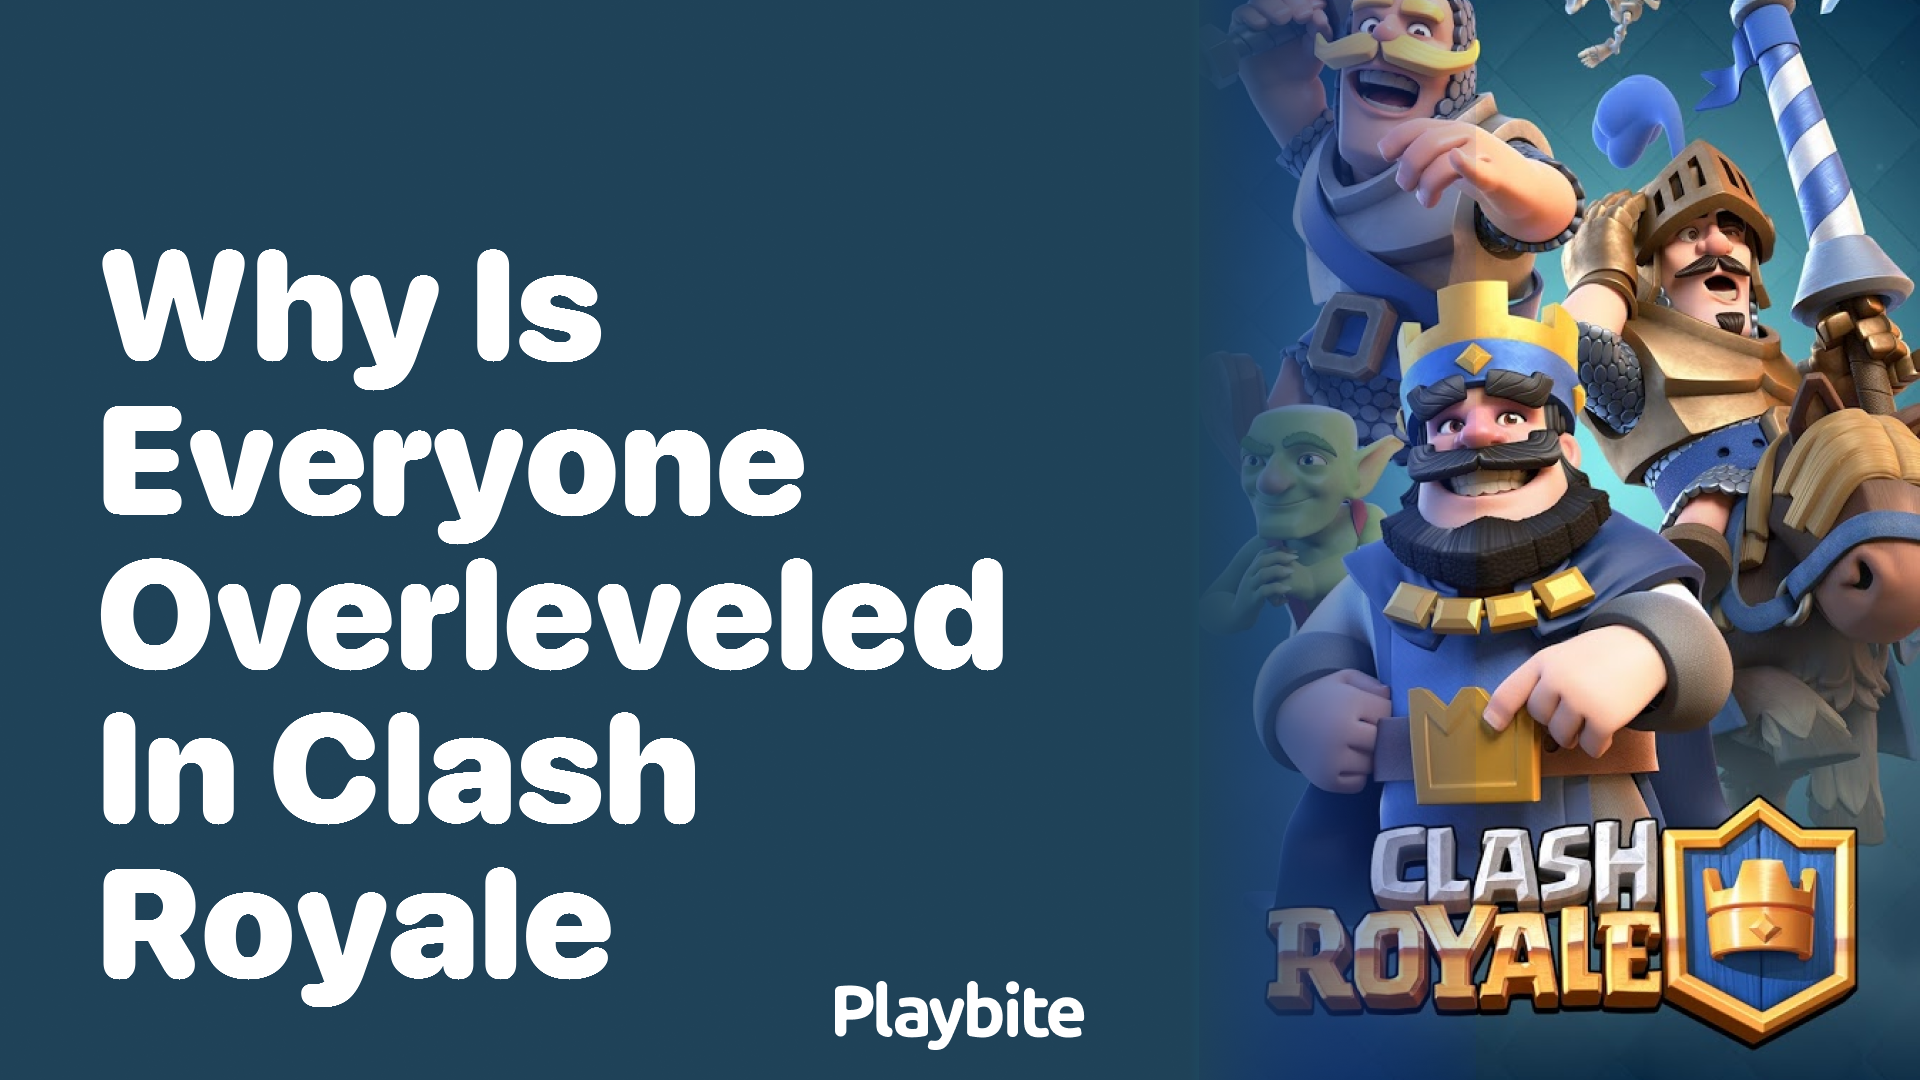 Why is Everyone Overleveled in Clash Royale?